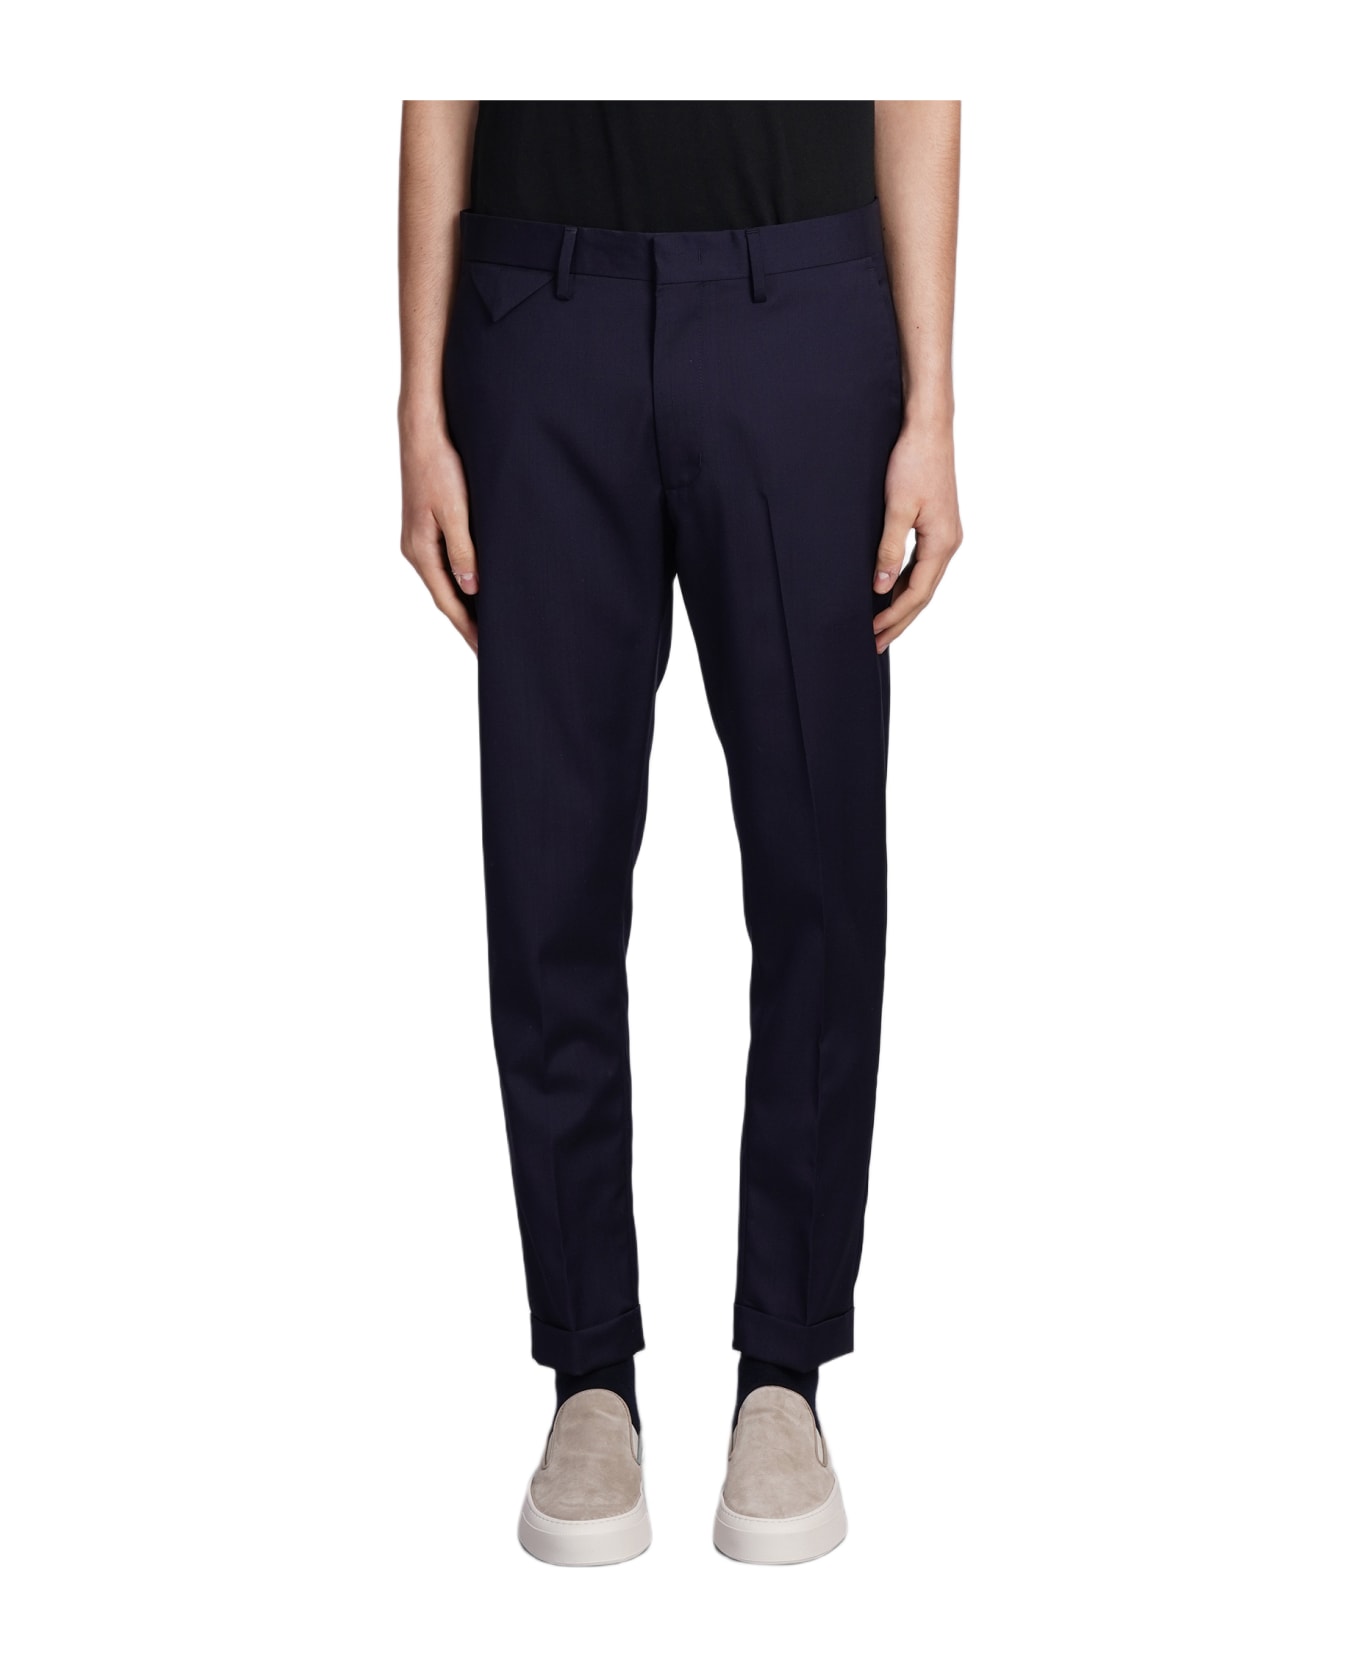 Low Brand Cooper T1.7 Tropical Pants In Blue Wool - blue ボトムス